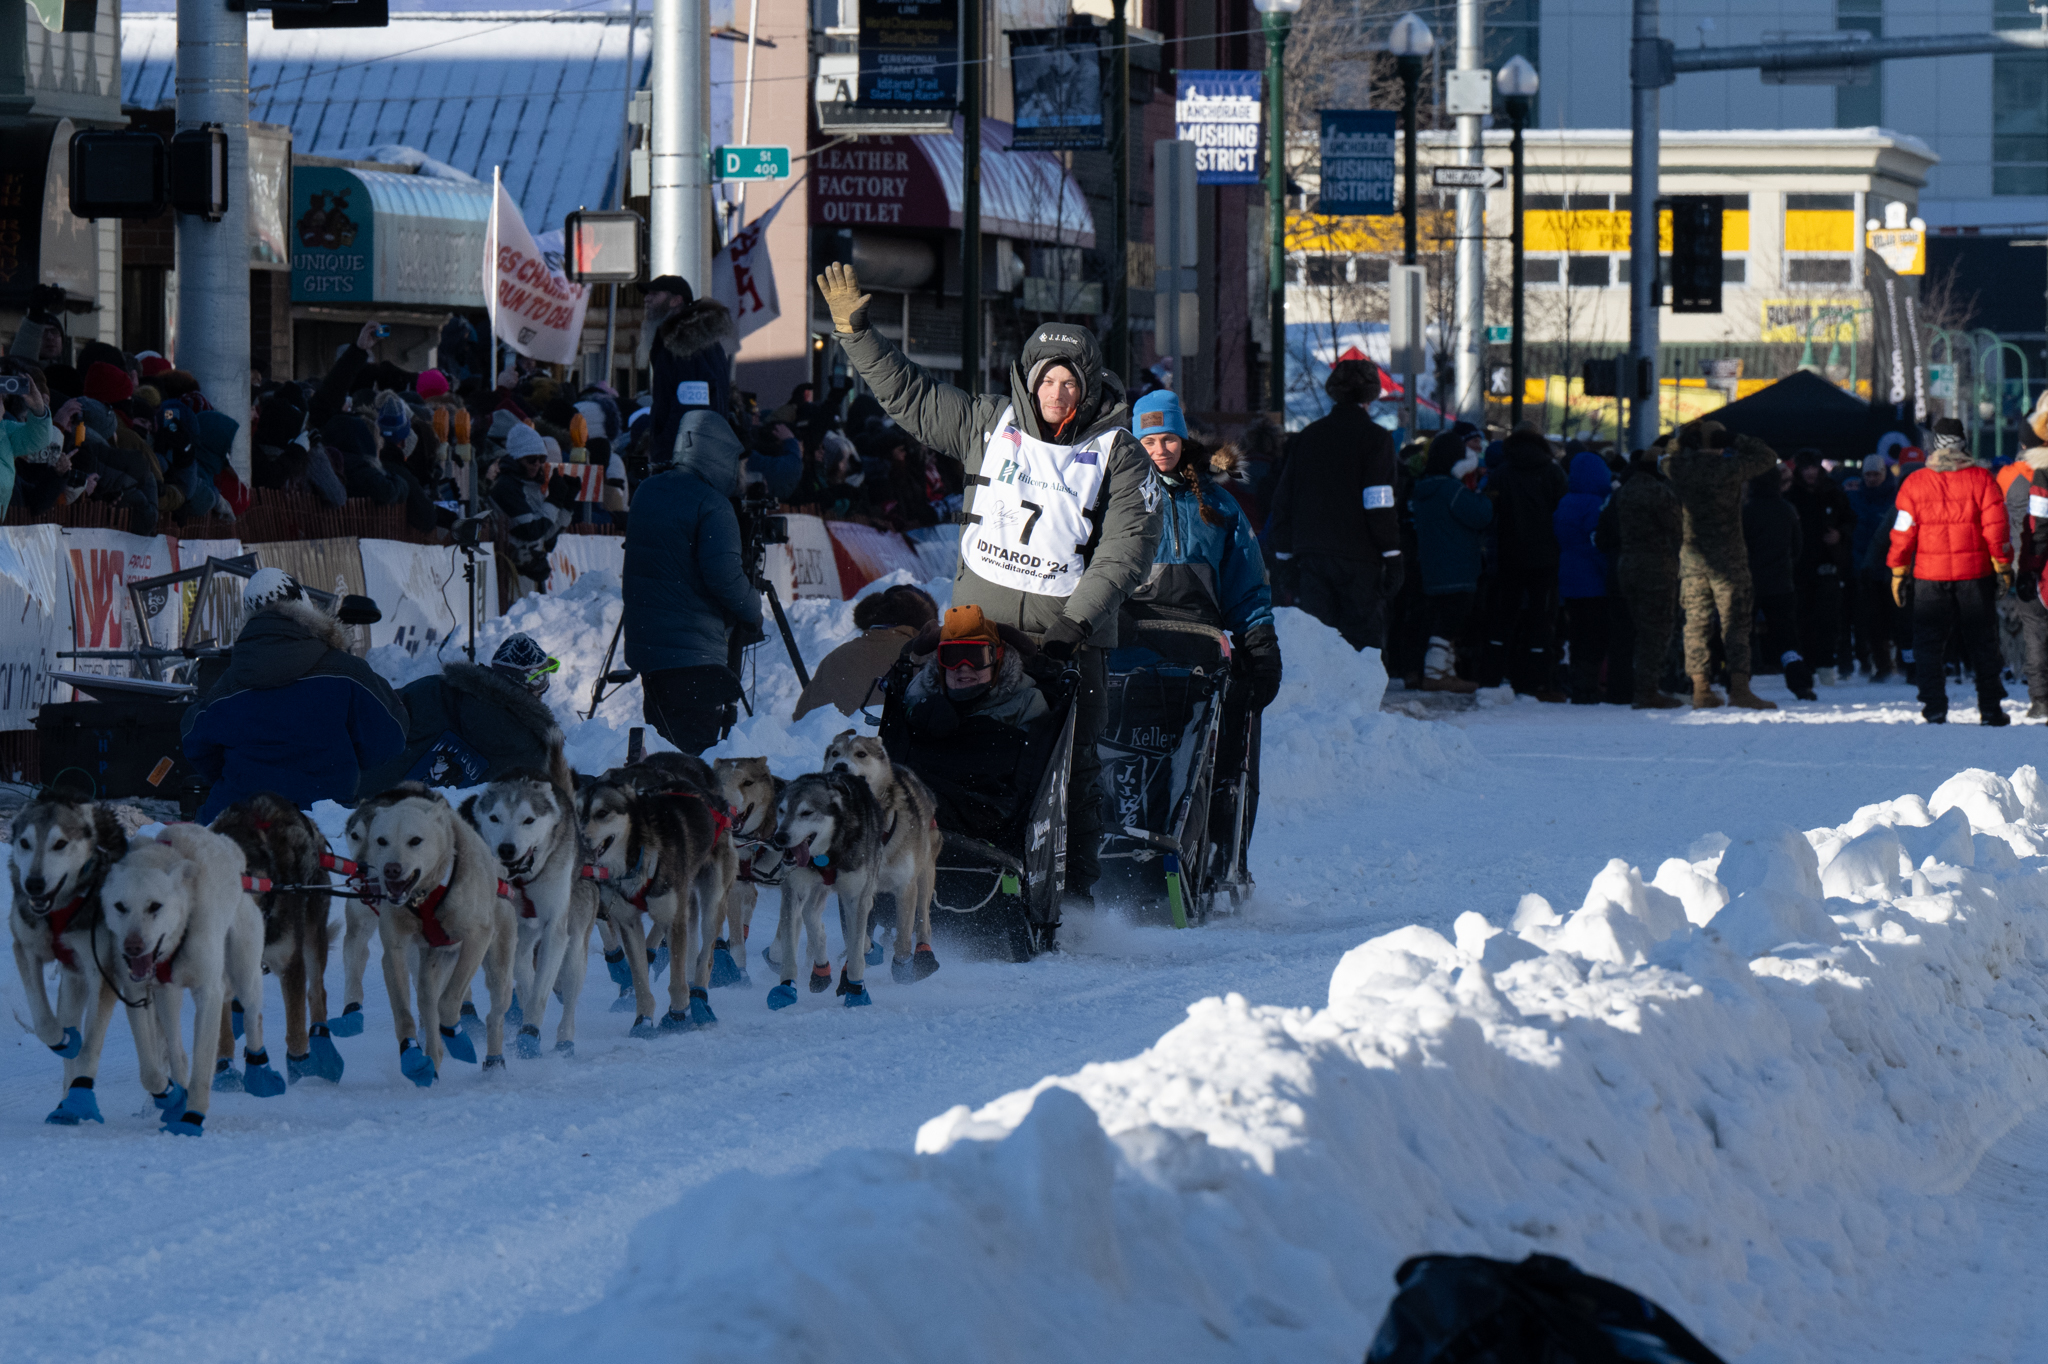 A man in black coat waves to fans on a dog sled.